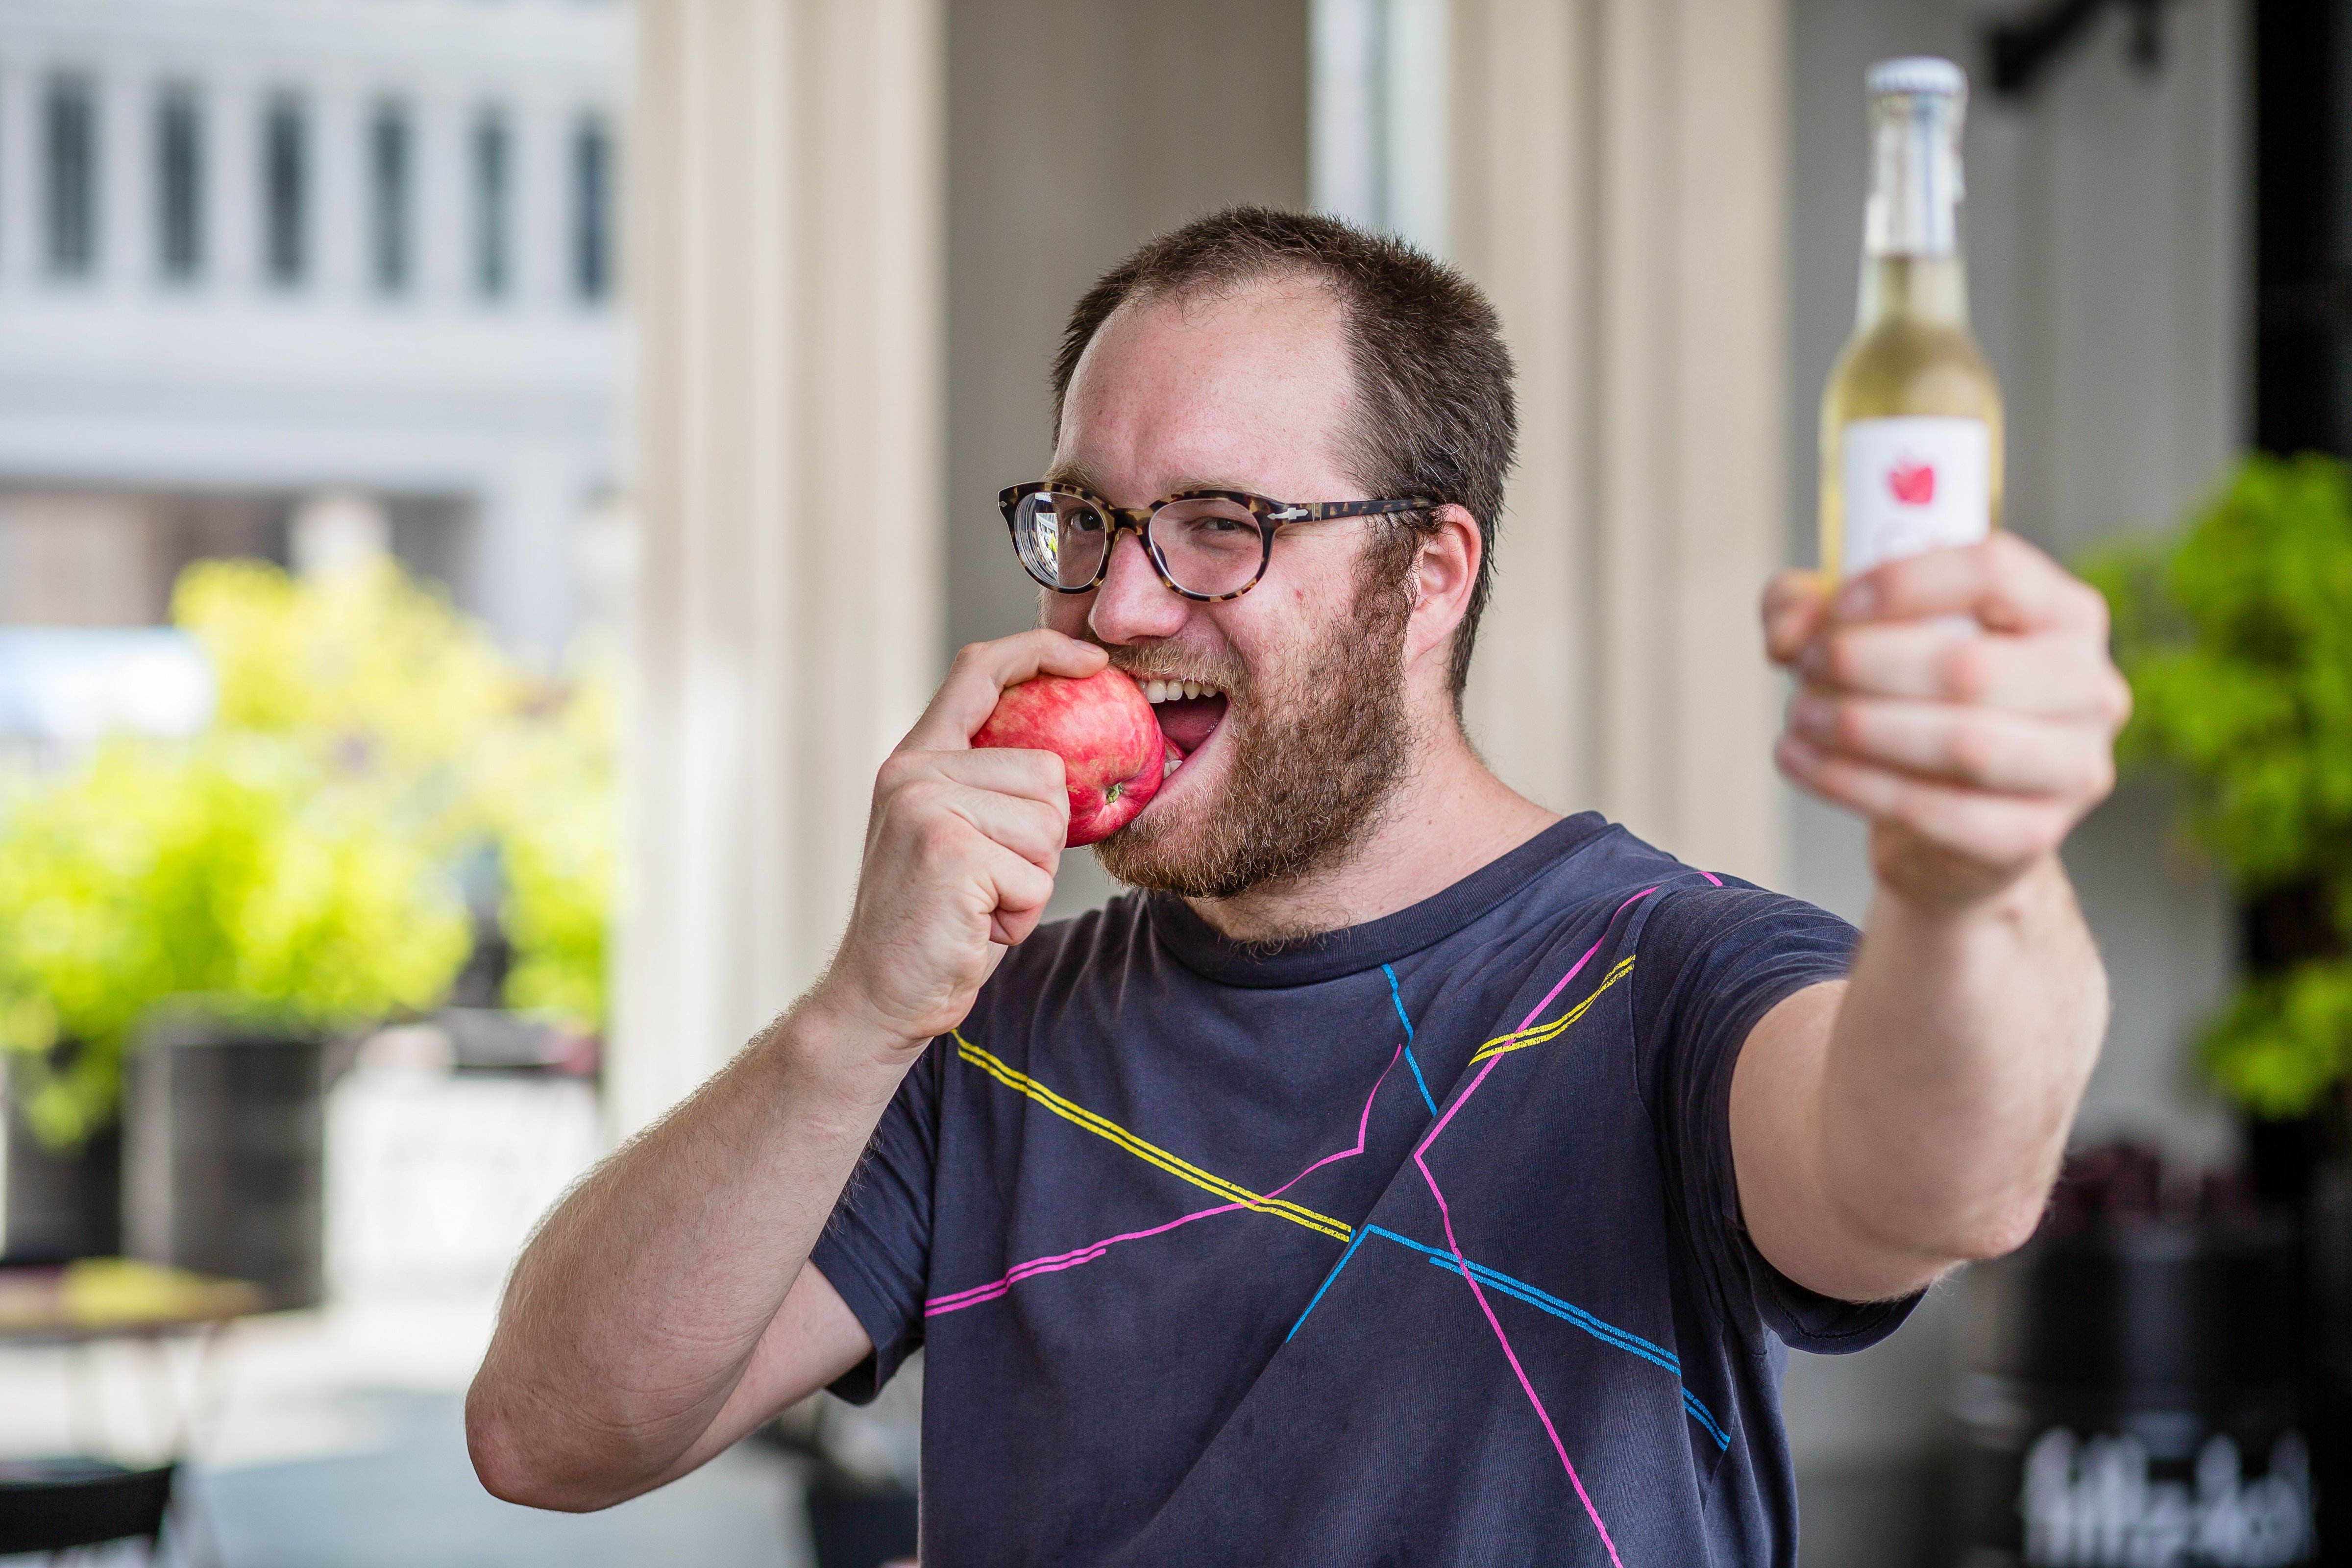 Jozef Czarnocki, owner of a popular Warsaw bar, is biting an apple and hoding a bottle of Polish cider to show his support for Twitter campaign "#eatapples to spite Putin", in Warsaw on July 31, 2014. (WOJTEK RADWANSKI—AFP/Getty Images)